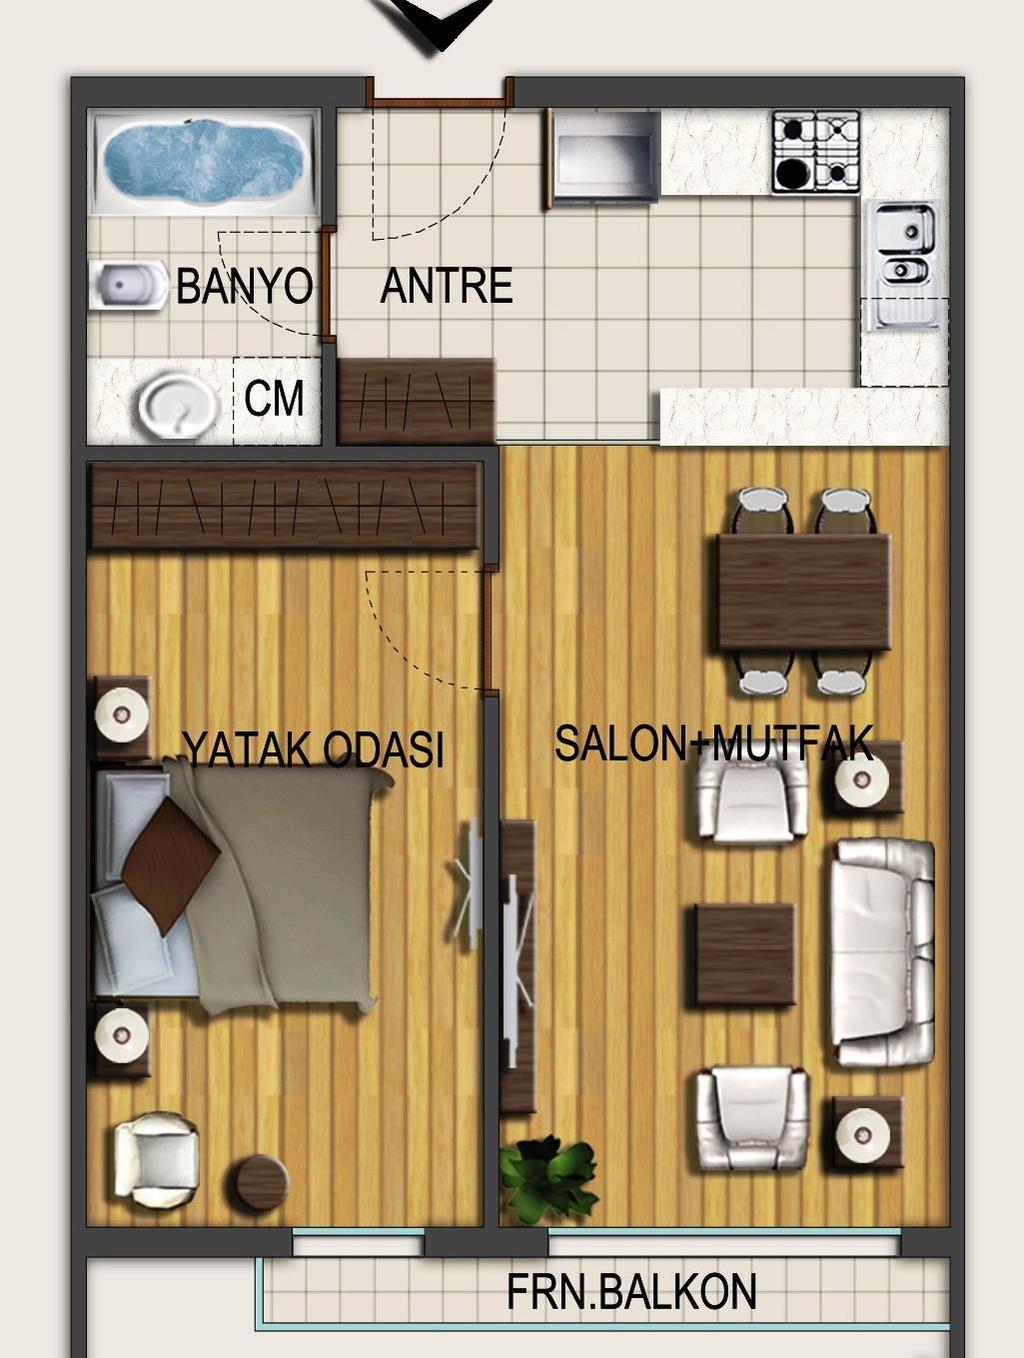 Typical 1+1 Apartment One bedroom apartment plus deluxe pack Sizes NET 42.40 m² - 54.14 m² Sizes GROSS 63.00 m² - 80.